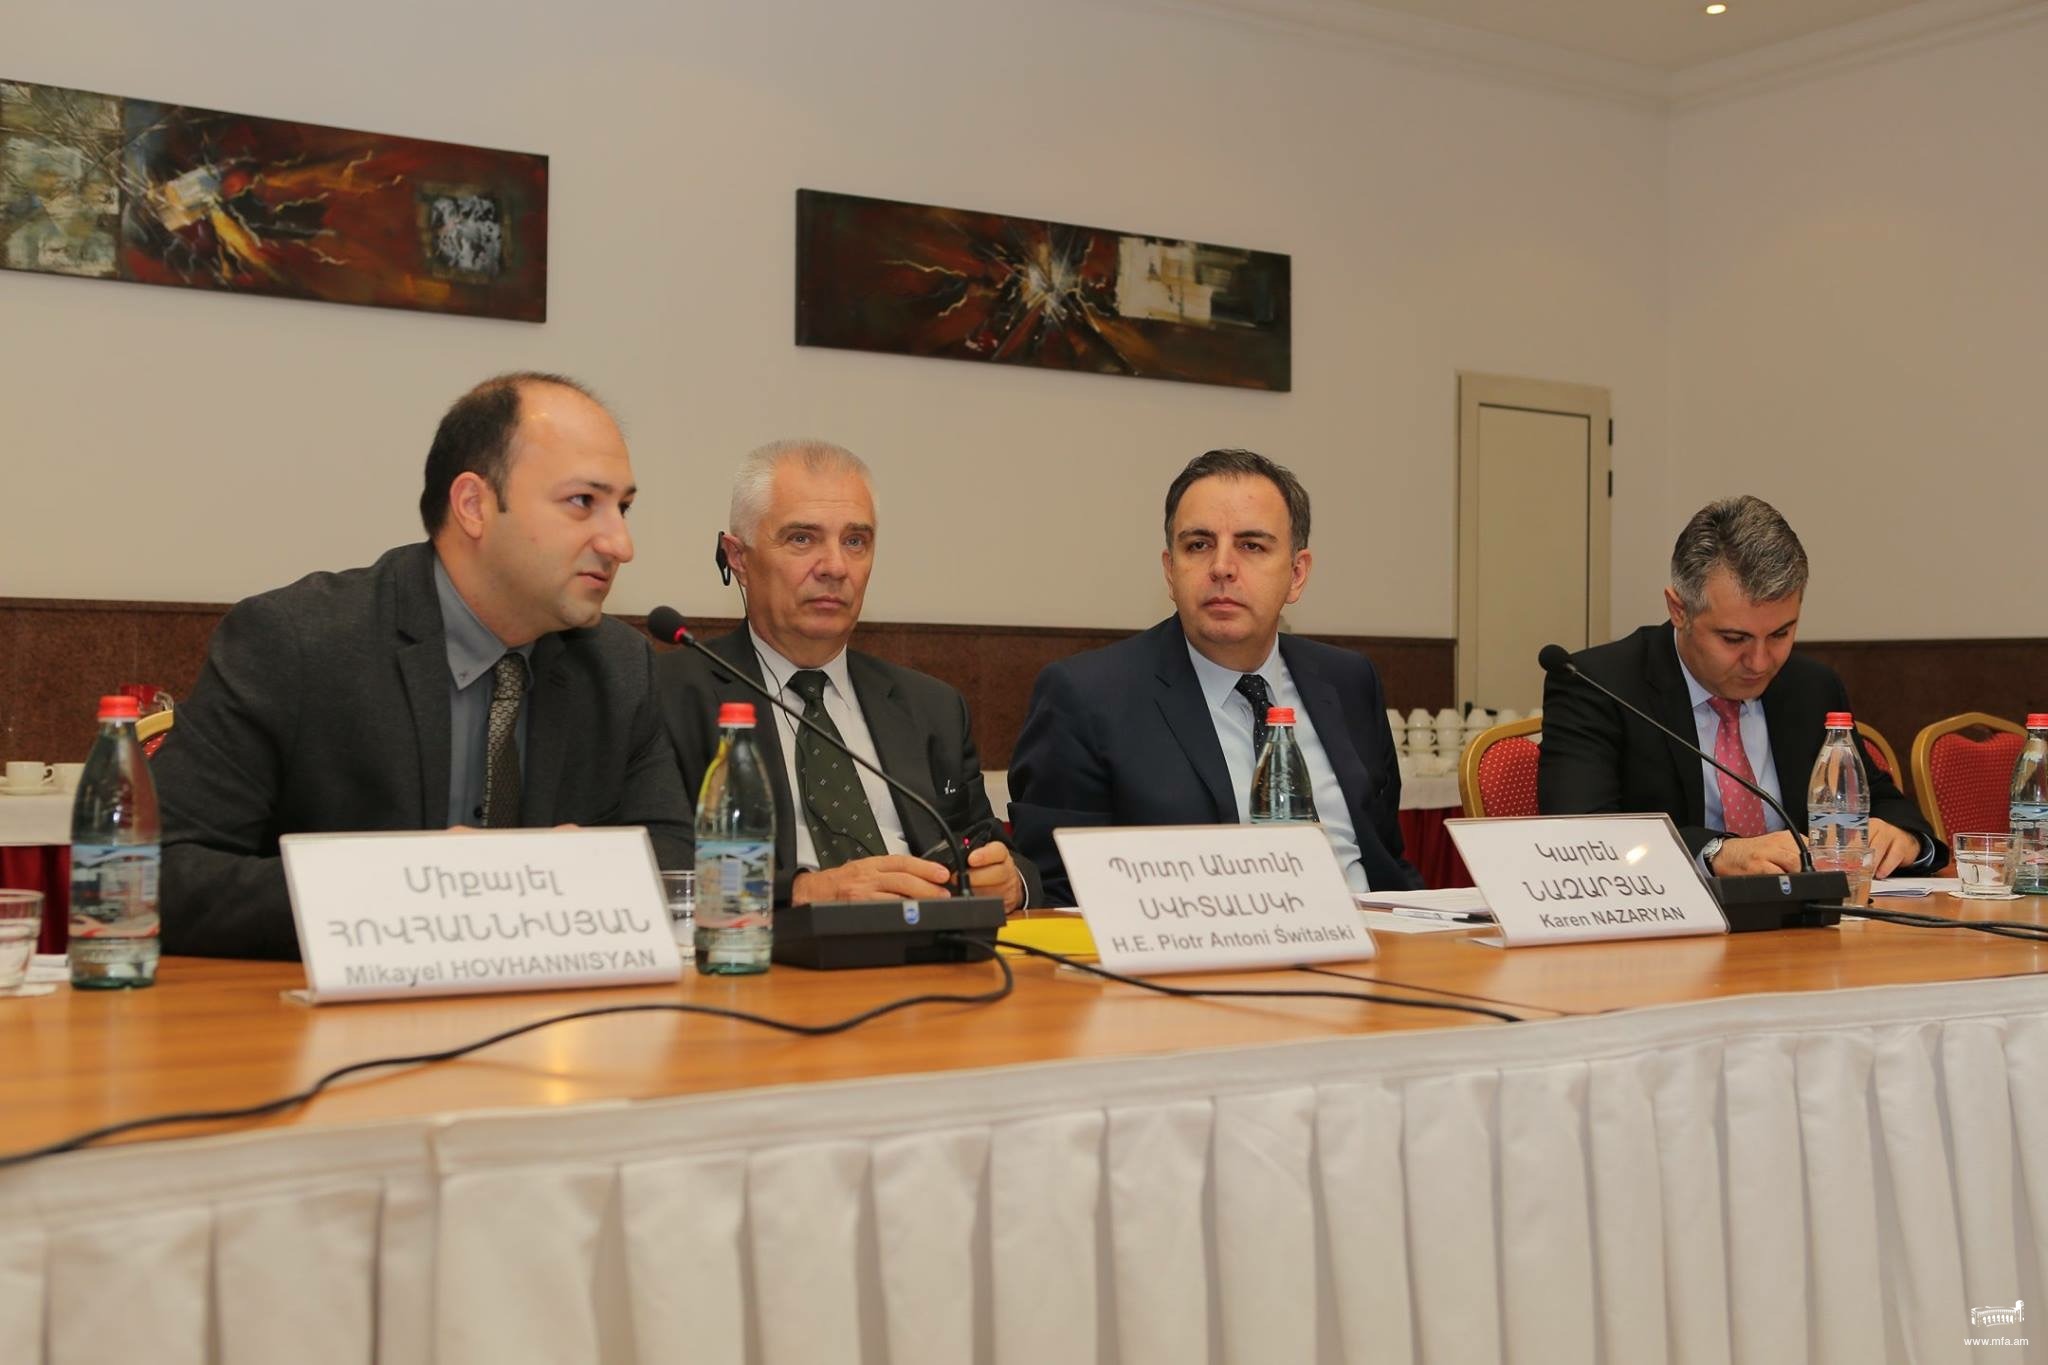 Deputy Foreign Minister participated in the conference on civil society